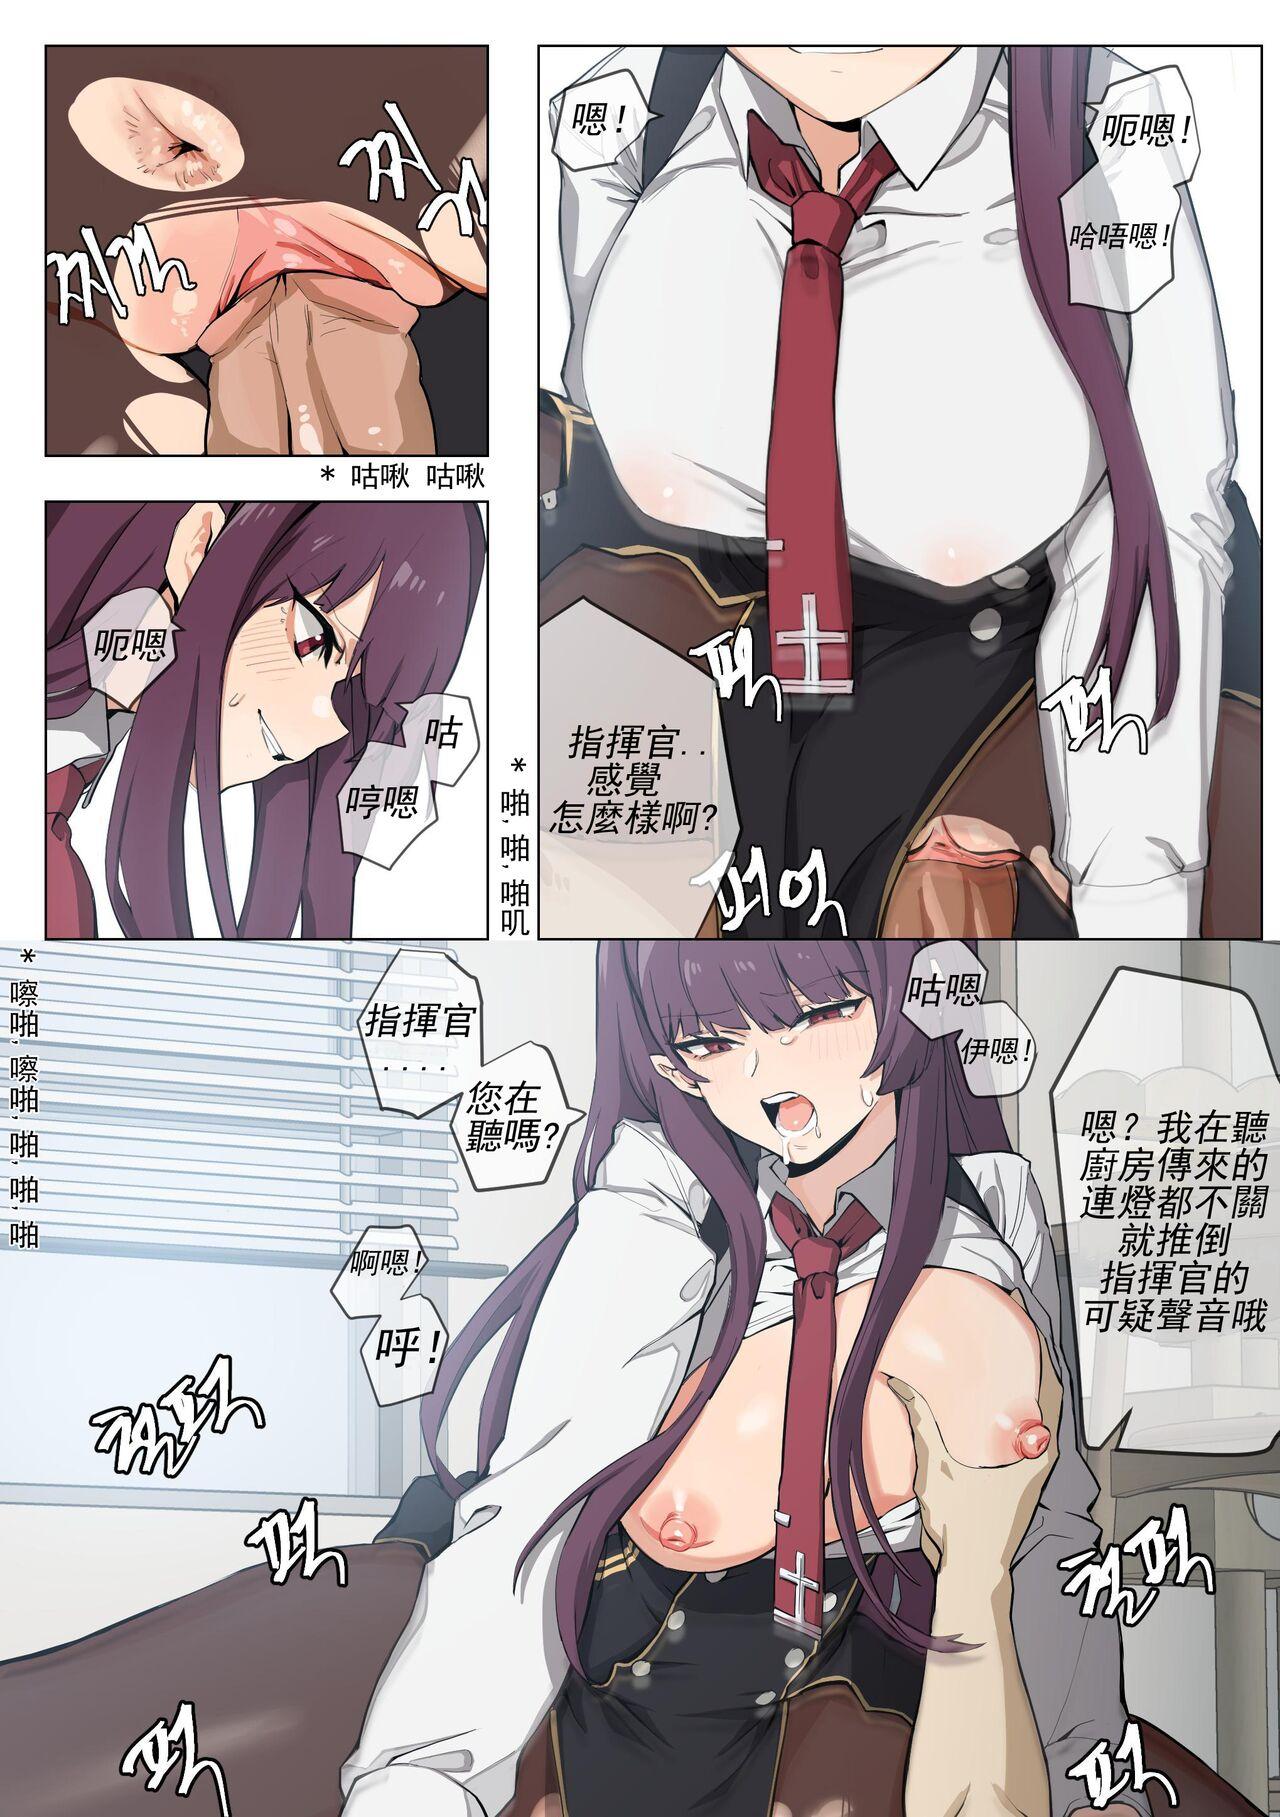 Clothed 【banssee】wa2000 （AKwoL烤肉组） Pigtails - Page 6